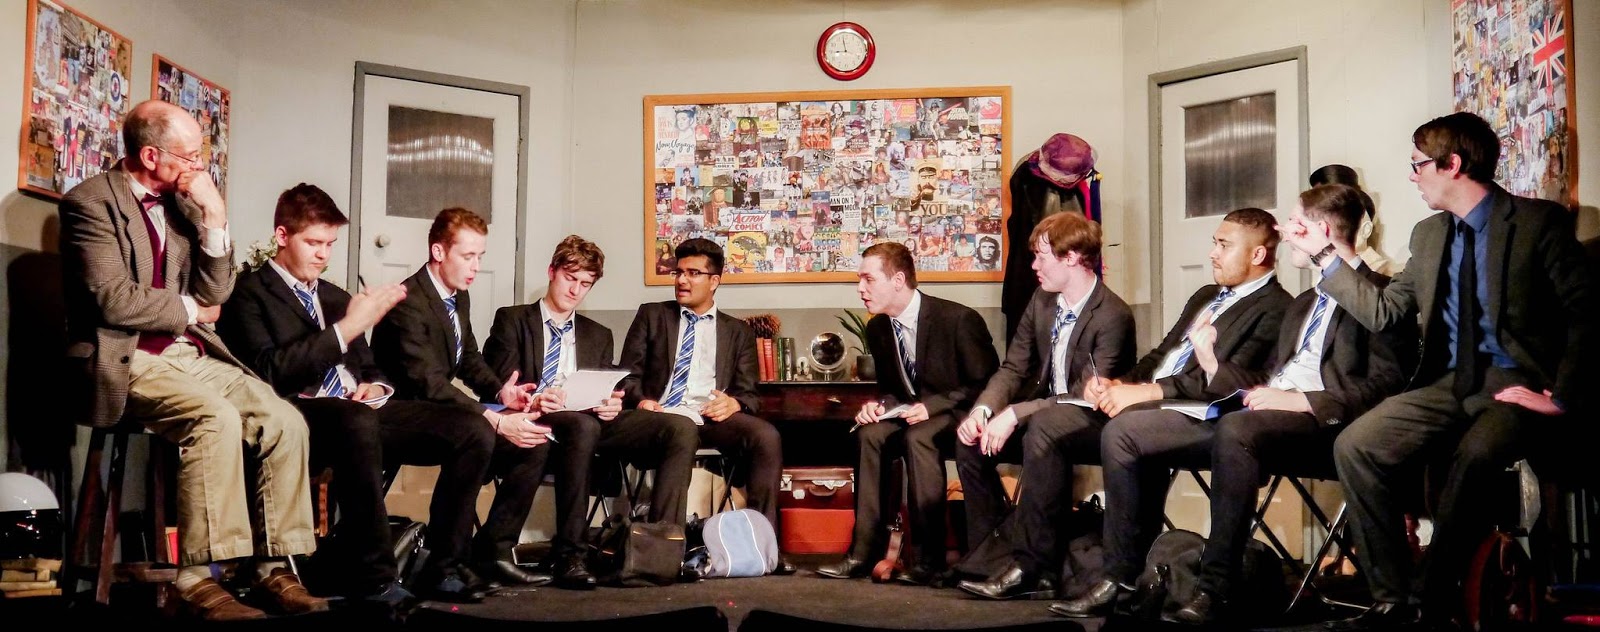 Review of The History Boys by Alan Bennett at The Playhouse Theatre, Northampton